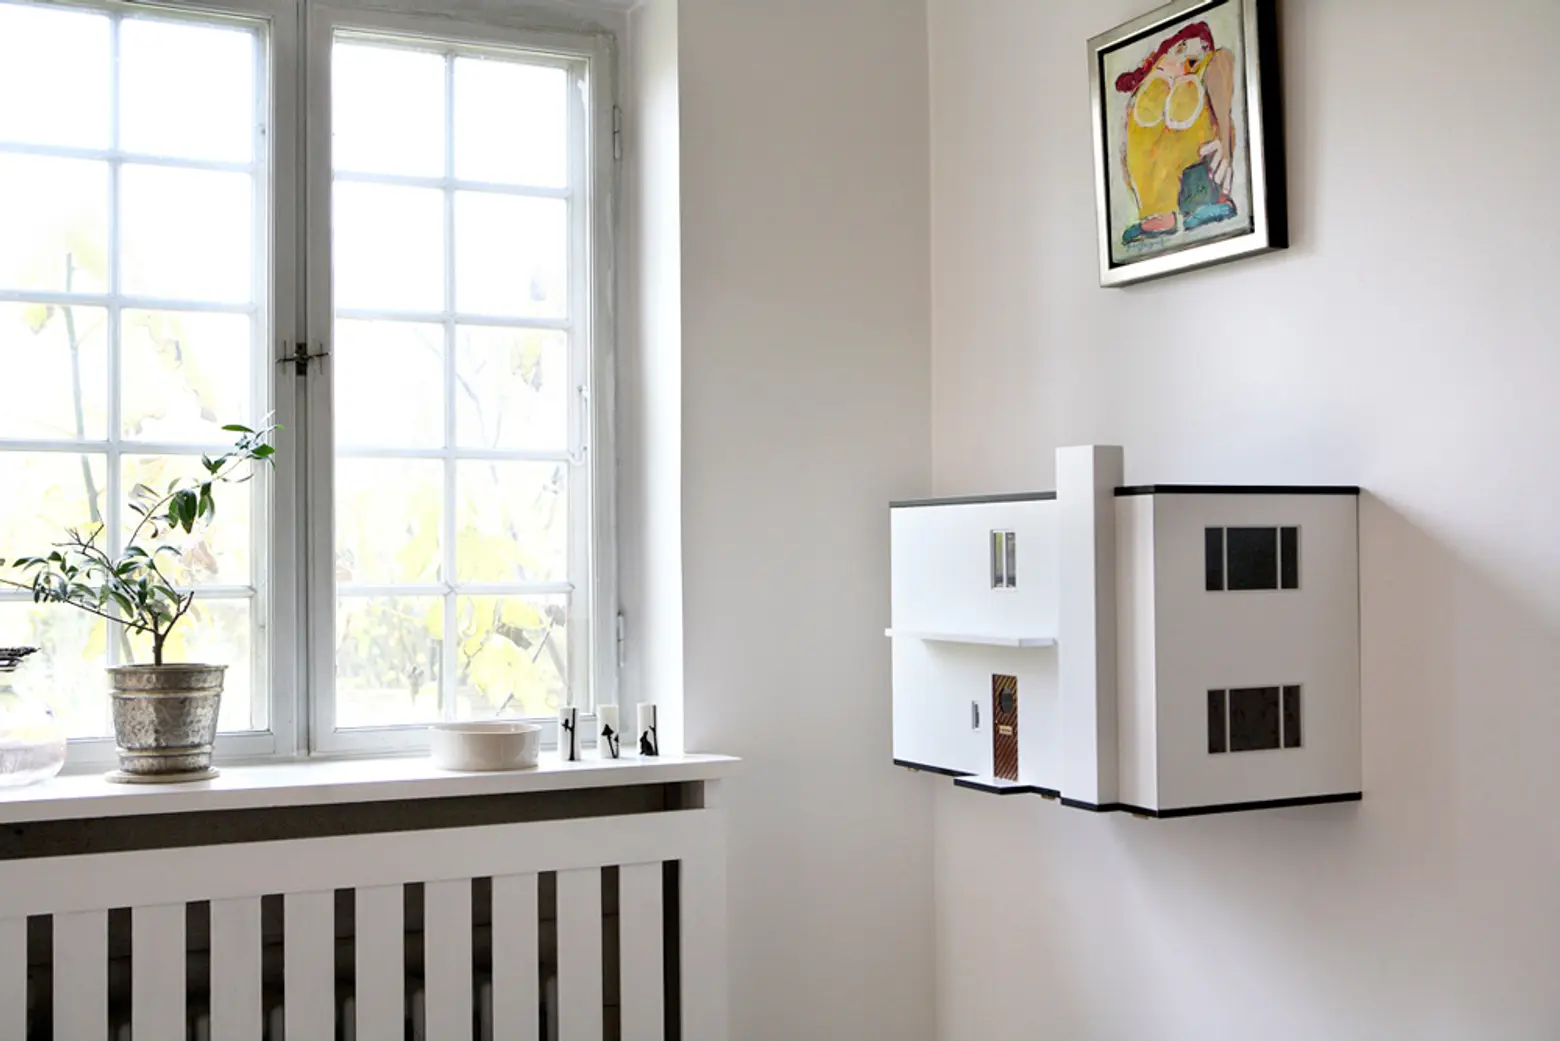 This Arne Jacobsen MiiBoxen Dollhouse is an 1:16 Replica of the Architect’s Home